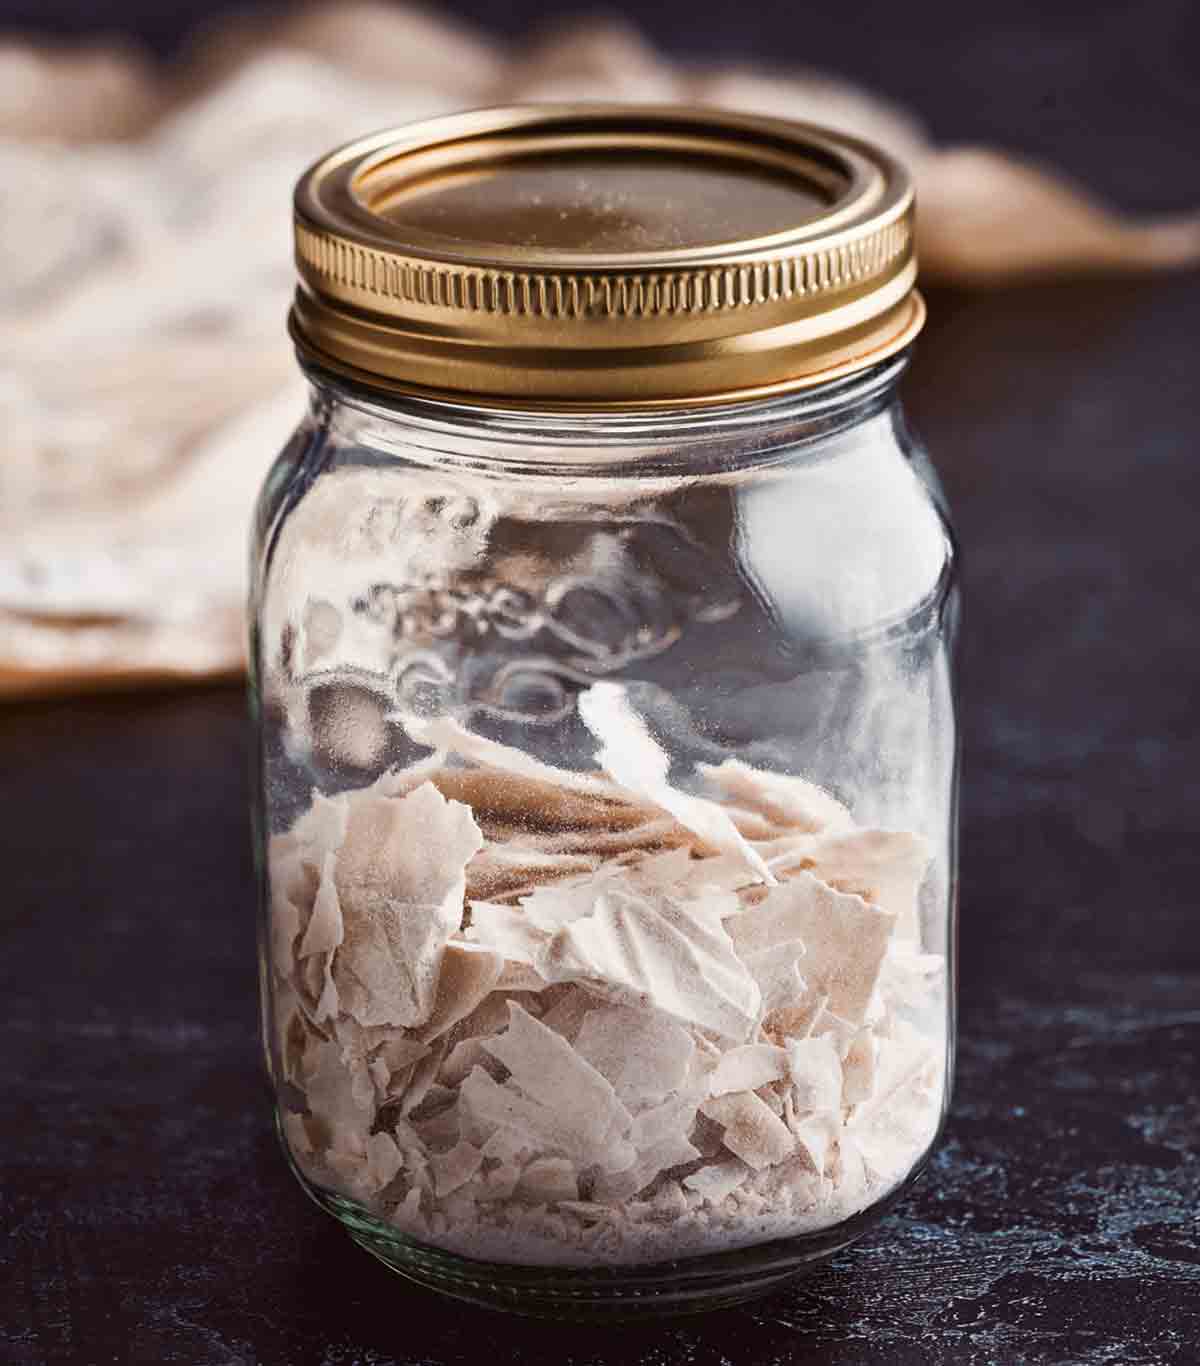 A jar of flaked dried sourdough starter